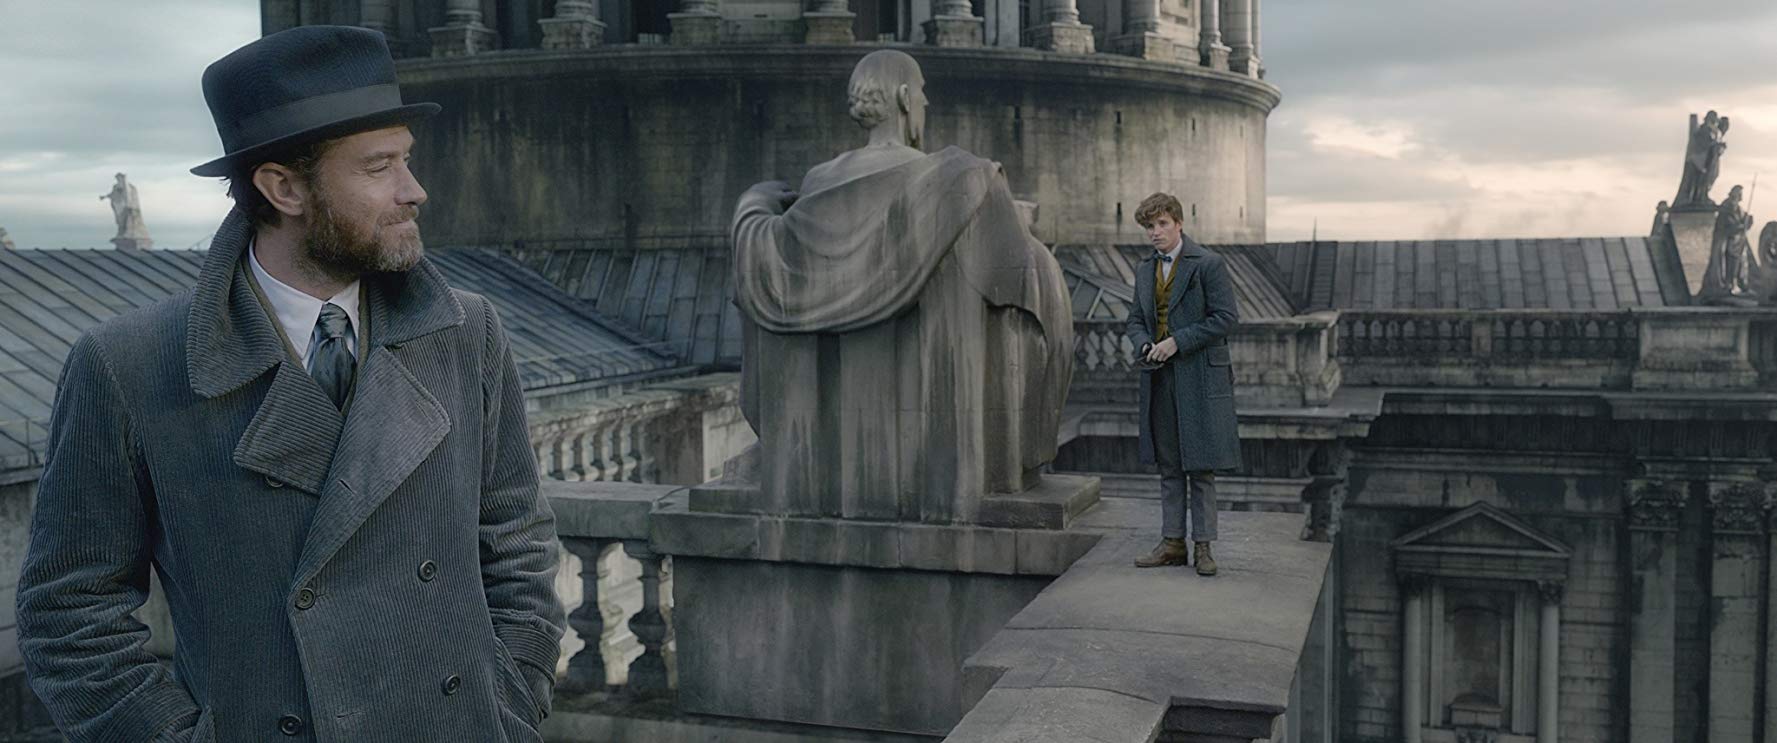 November movie preview: 'fantastic beasts: 'the crimes of grindelwald'